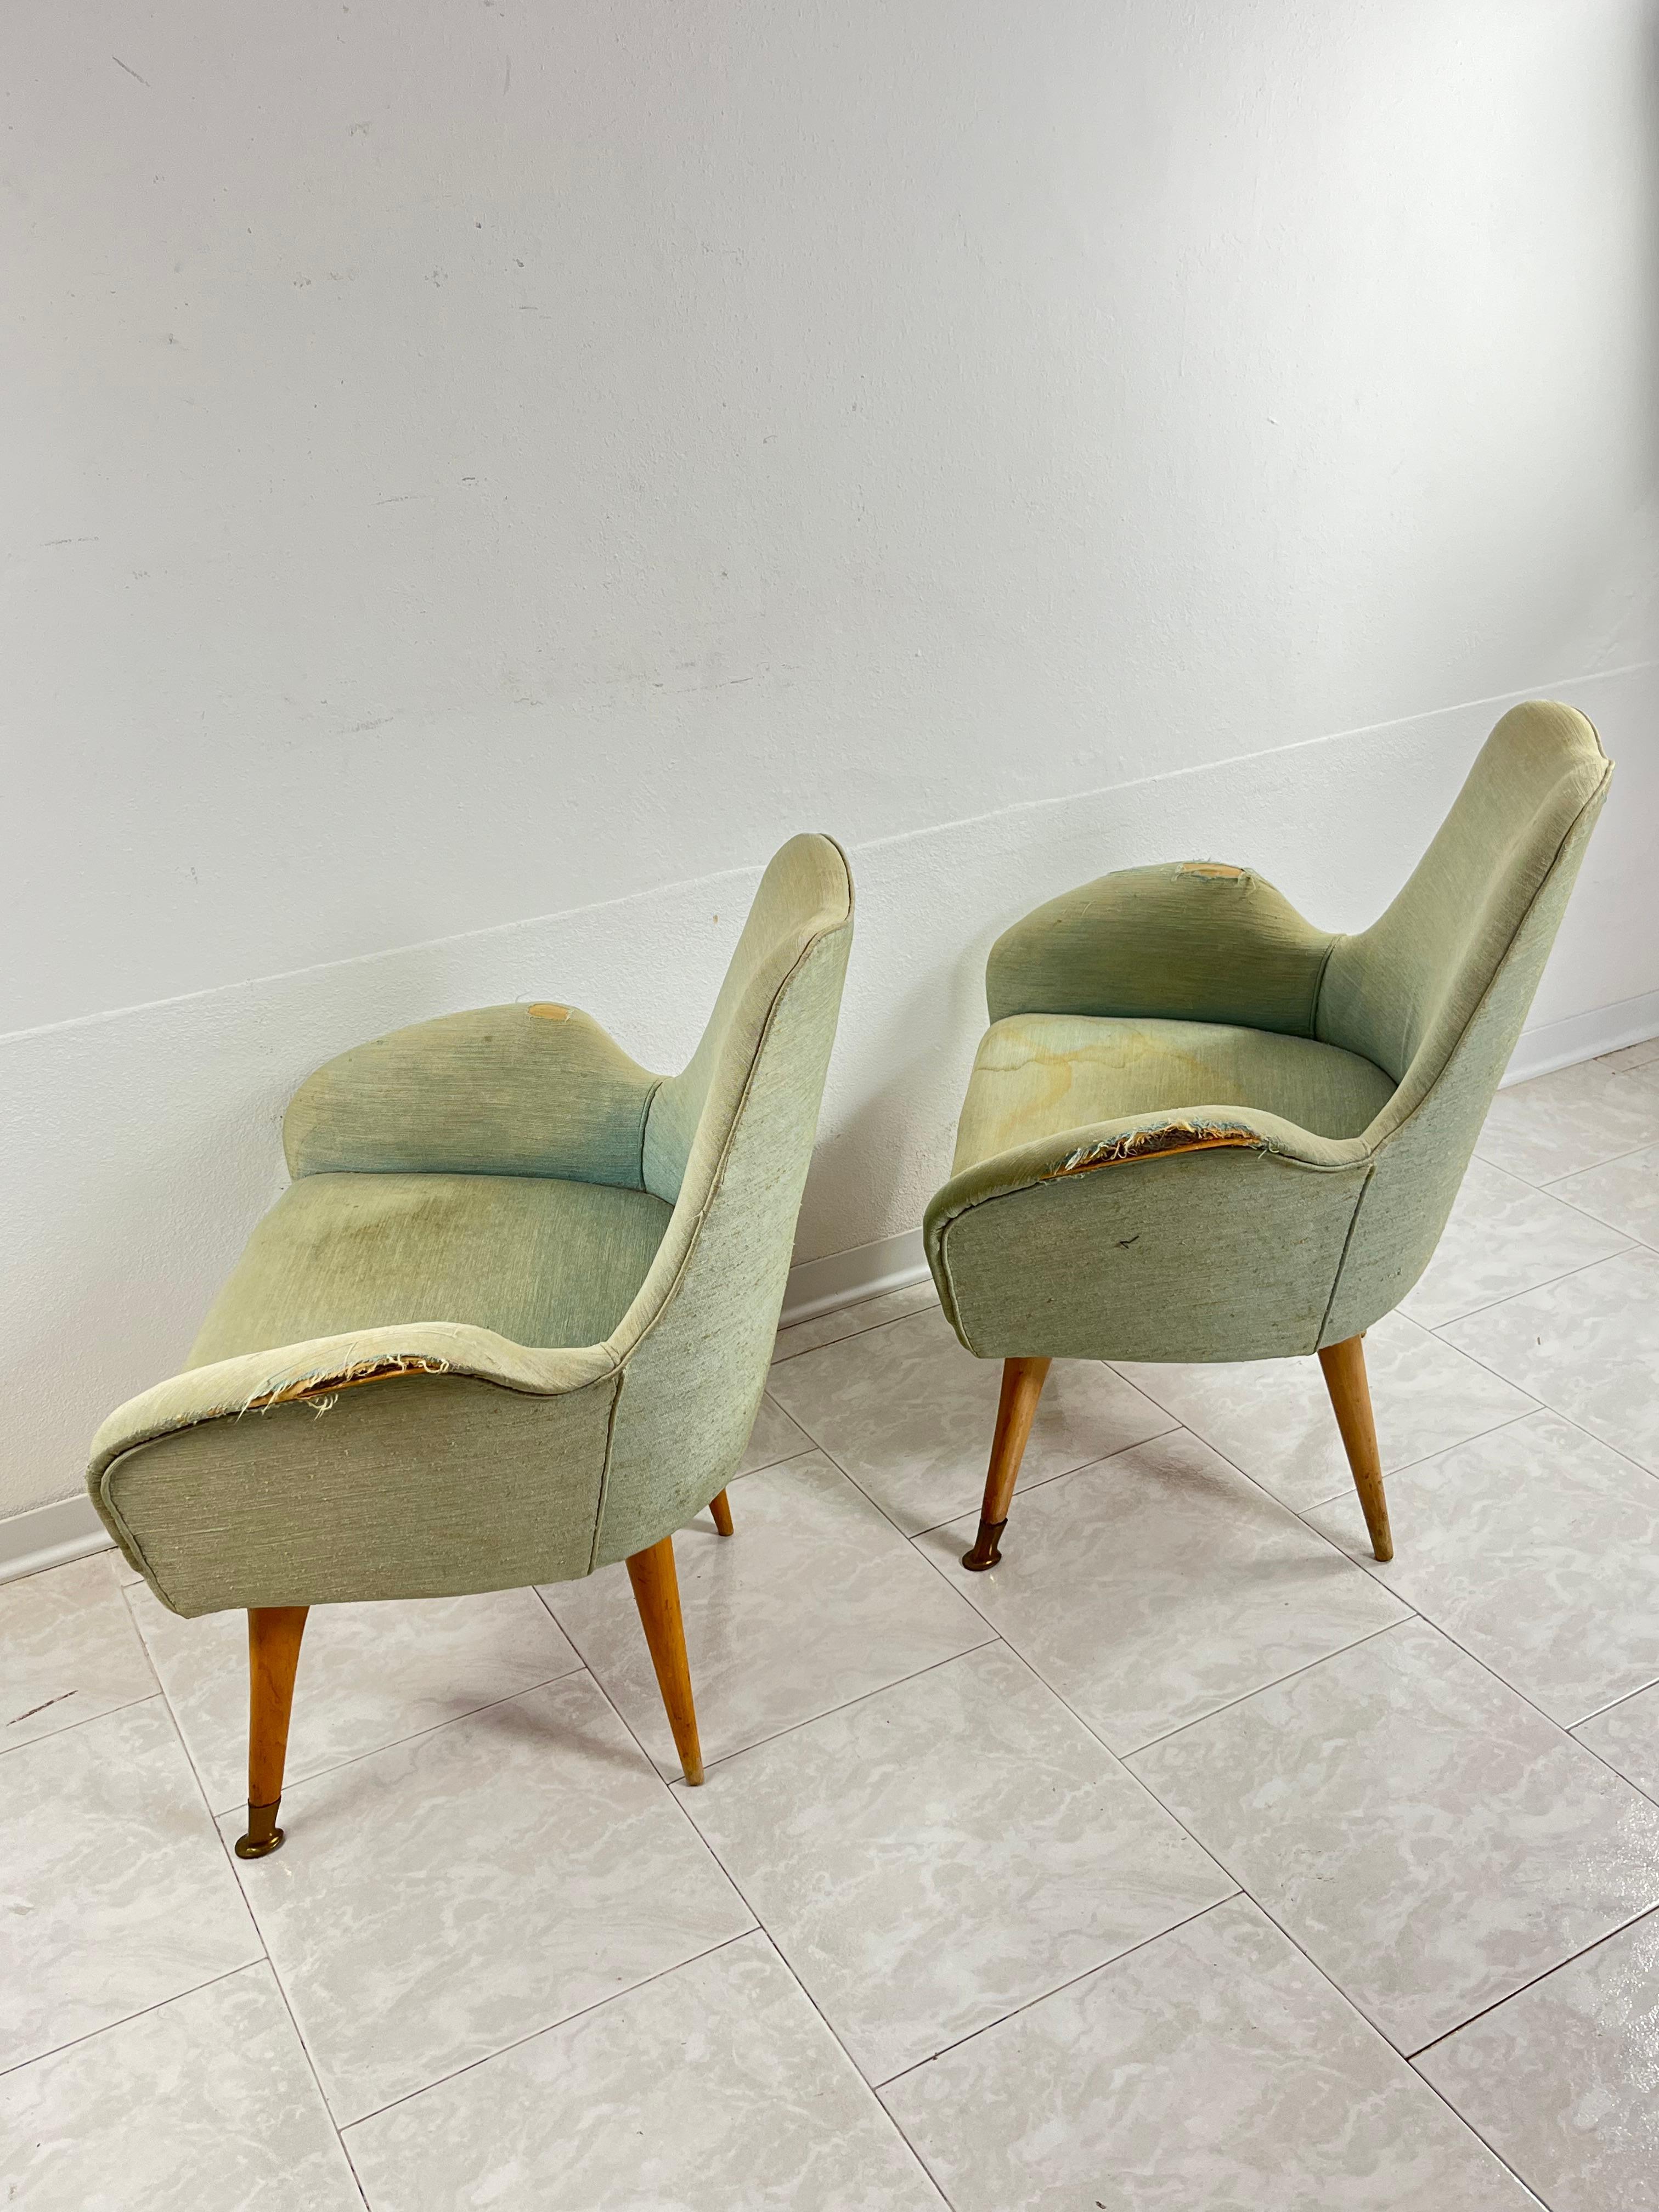 Pair of Mid-Century Armchairs Attributed To Federico Munari 1950s For Sale 2